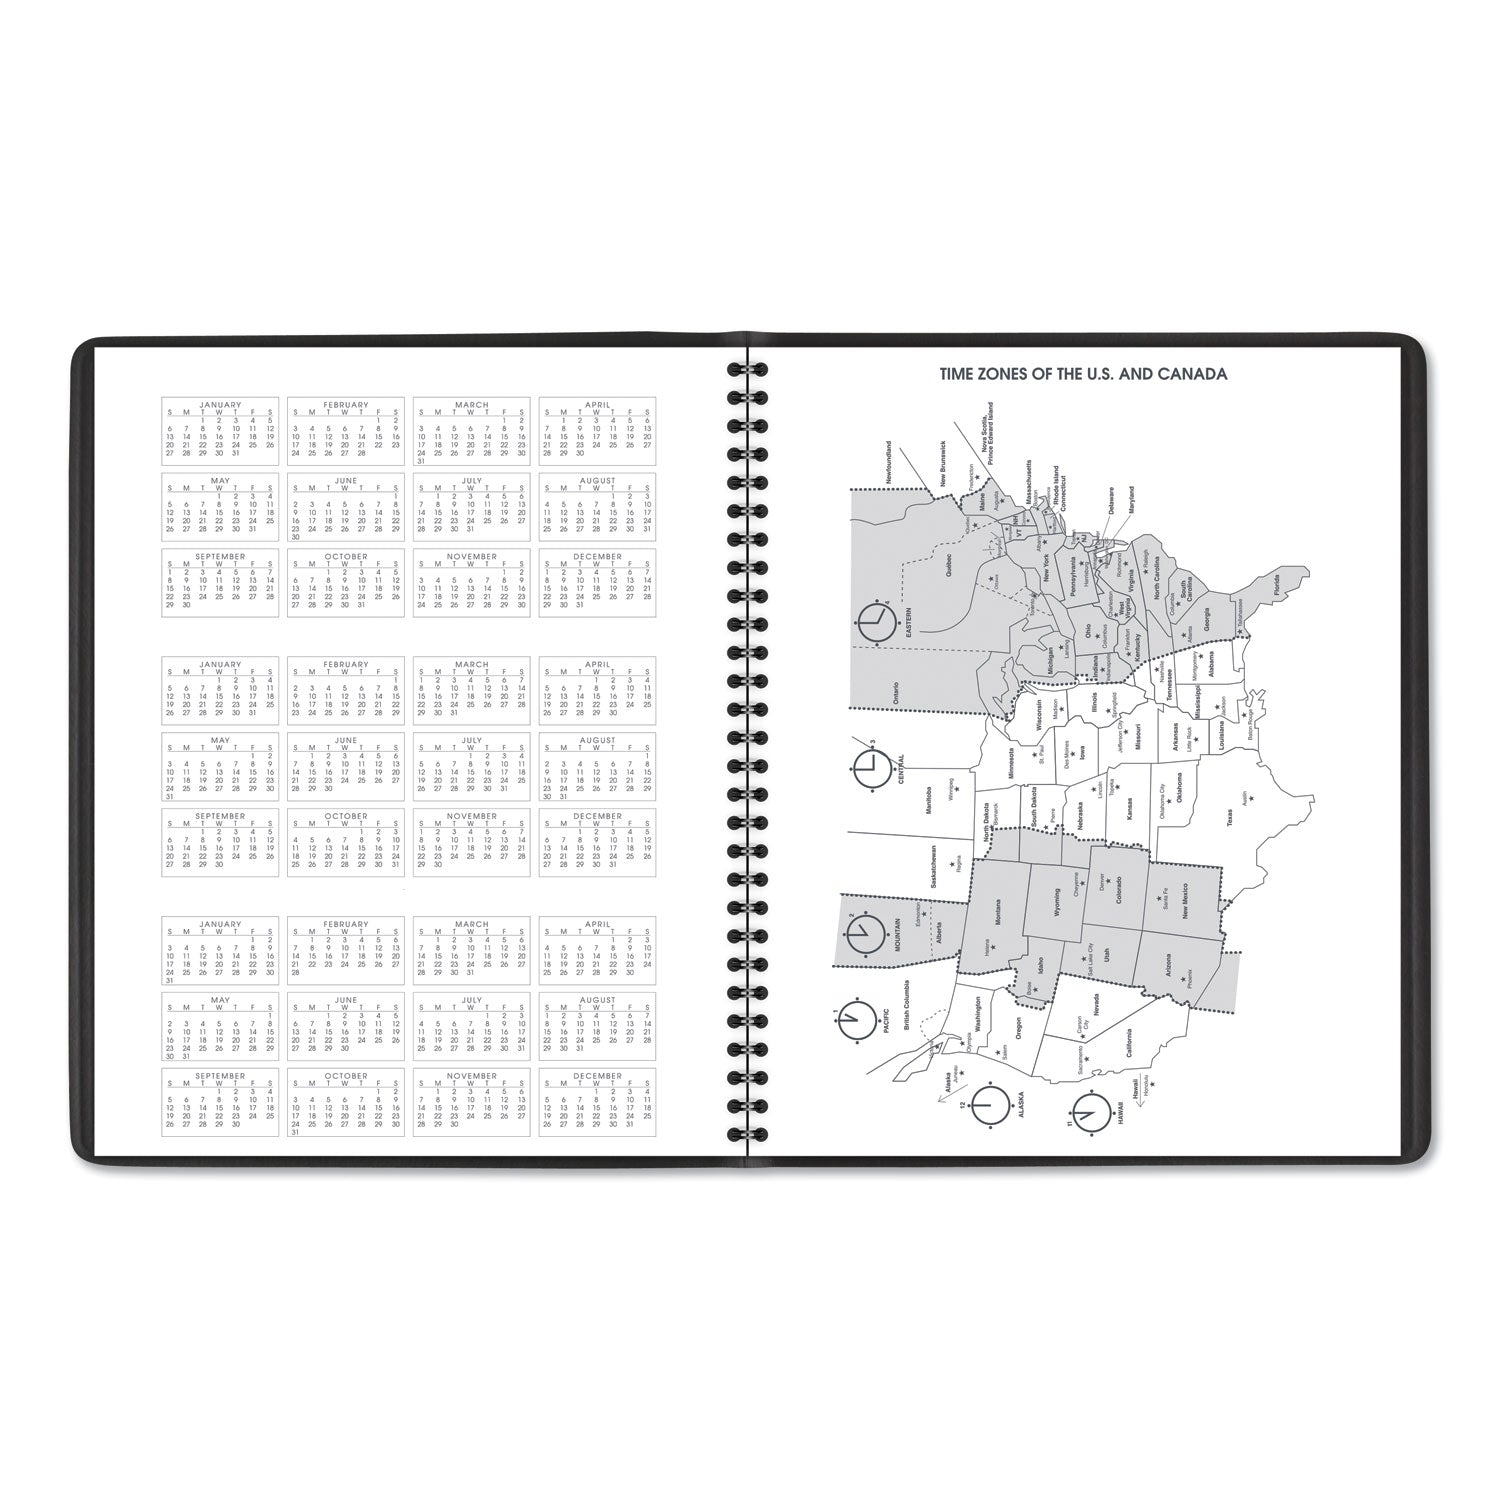 Monthly Planner, 11 x 9, Navy Cover, 15-Month (Jan to Mar): 2024 to 2025 - 